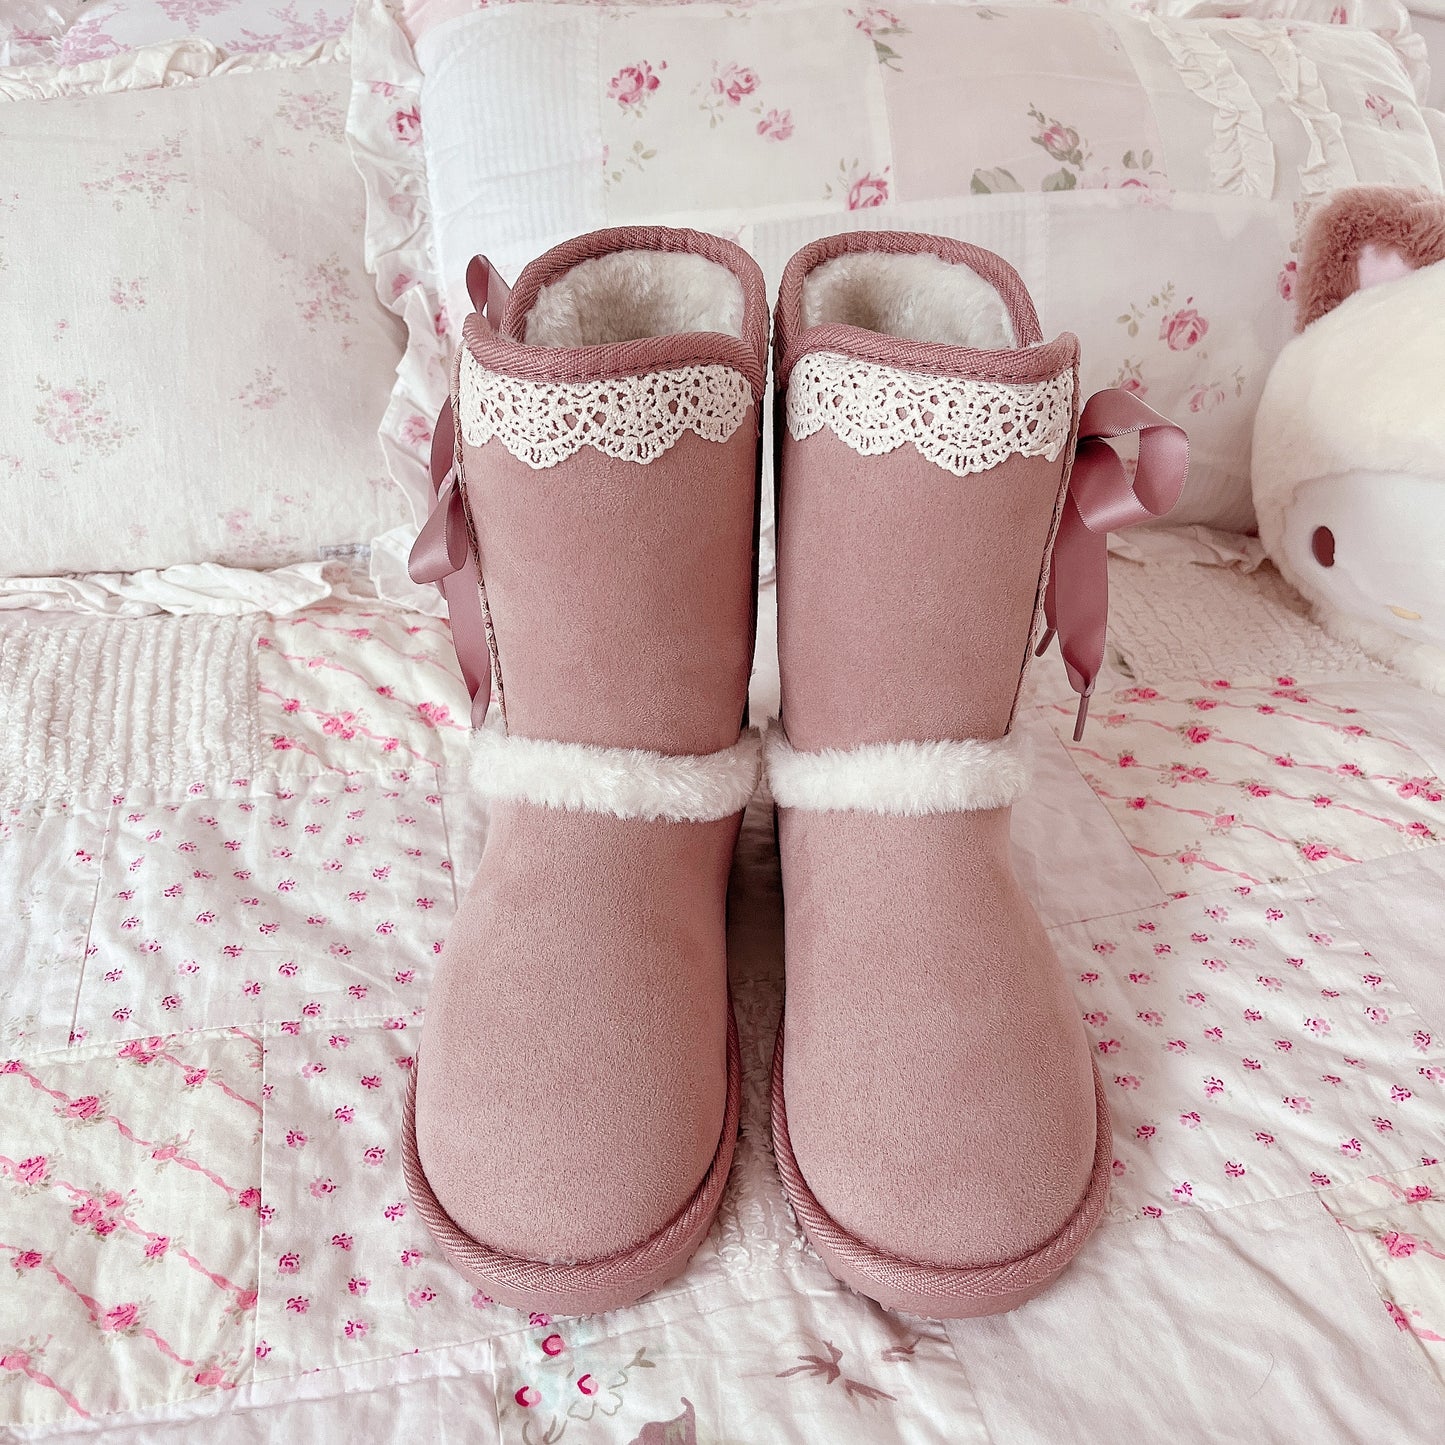 axes femme pink mouton boots